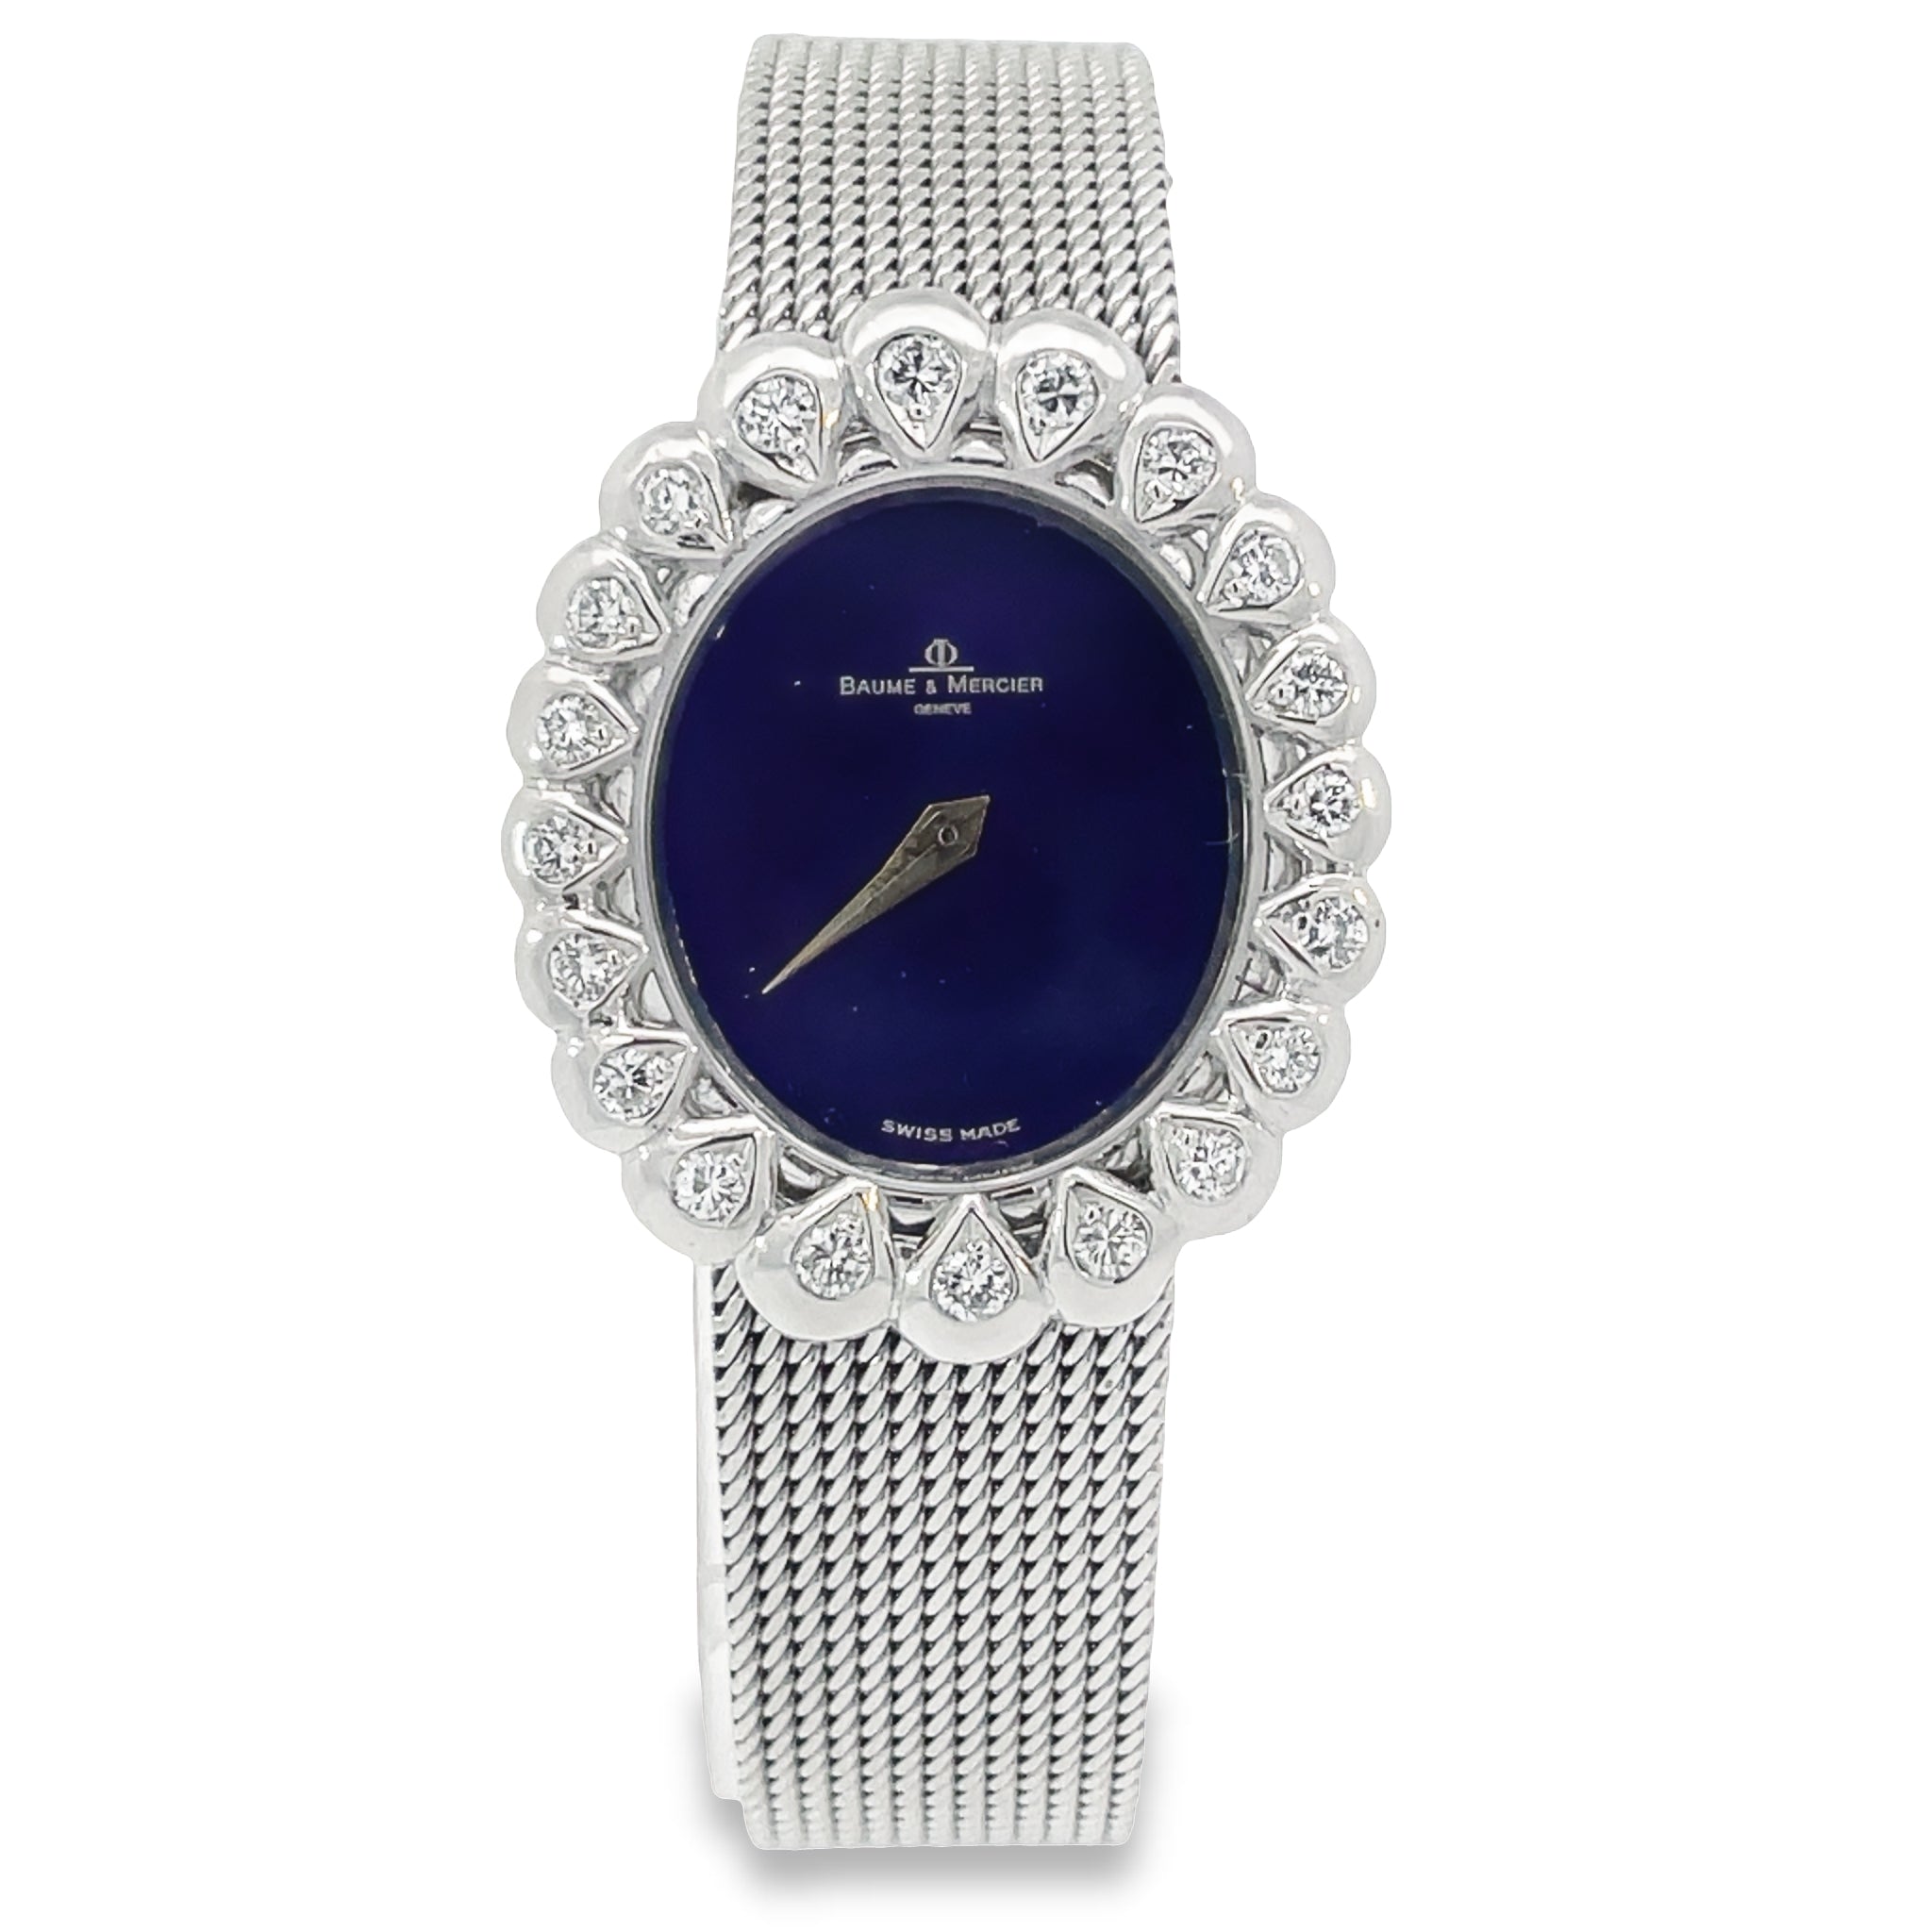 This exquisite Mercier White Gold Ladies Watch is perfect for those seeking a timeless luxury look. Crafted with 18k white gold and a stunning 1.20 ct diamond bezel, this watch is sure to make a statement. With manual wind and fold over clasp, this watch is in excellent condition and dates back to 1960. Make a fashion statement with this stunning piece of jewelry.